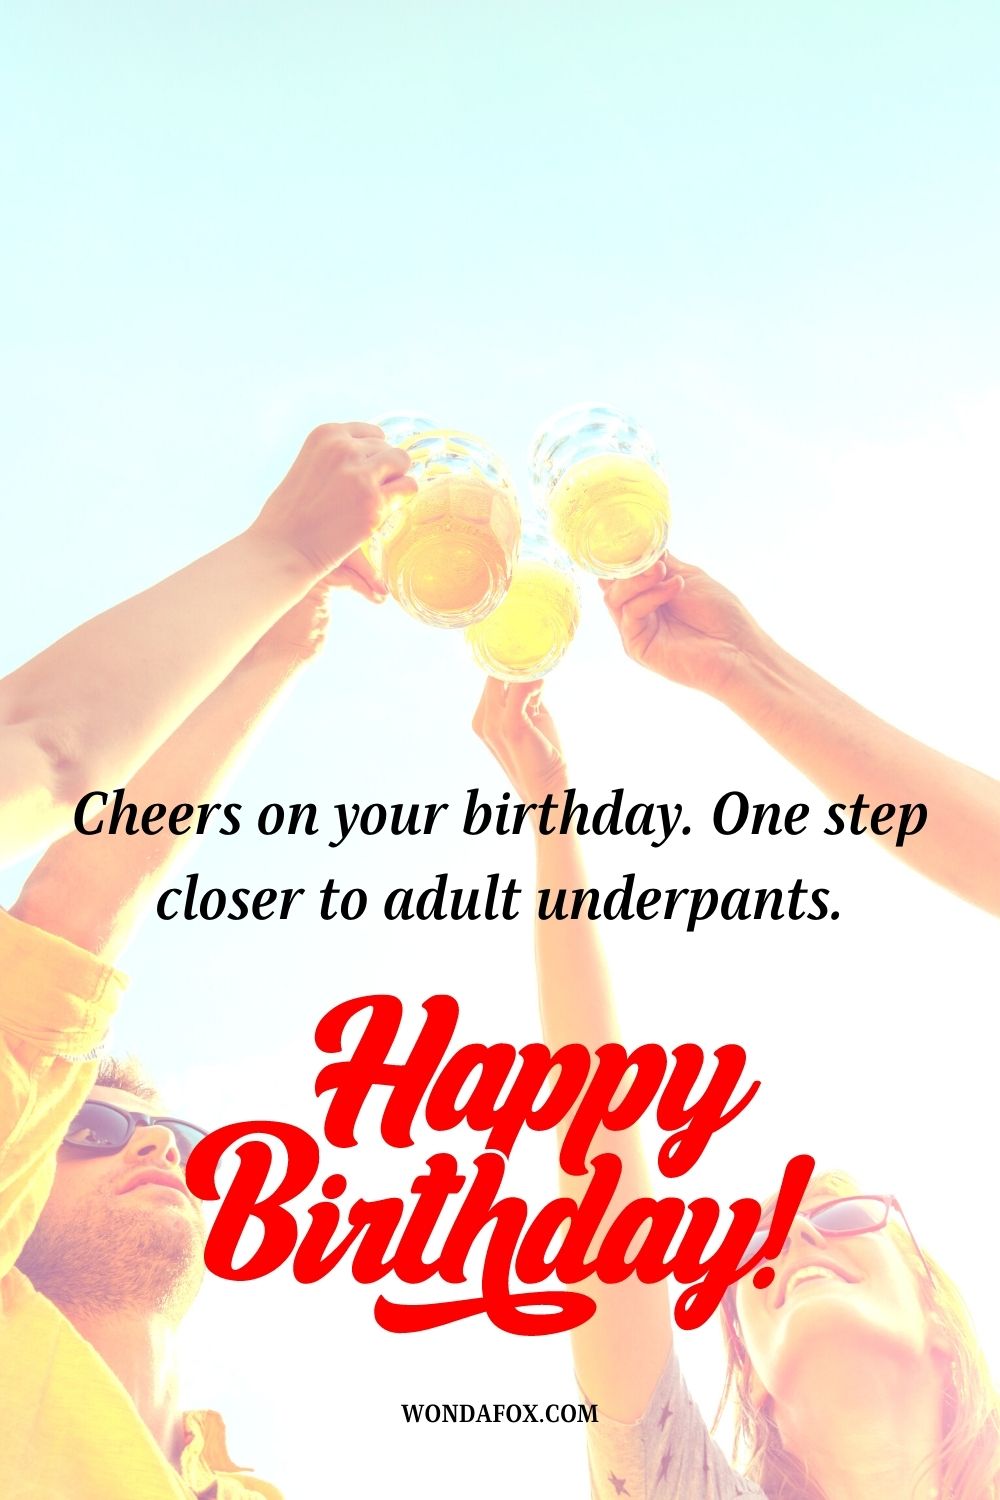 “Cheers on your birthday. One step closer to adult underpants.”